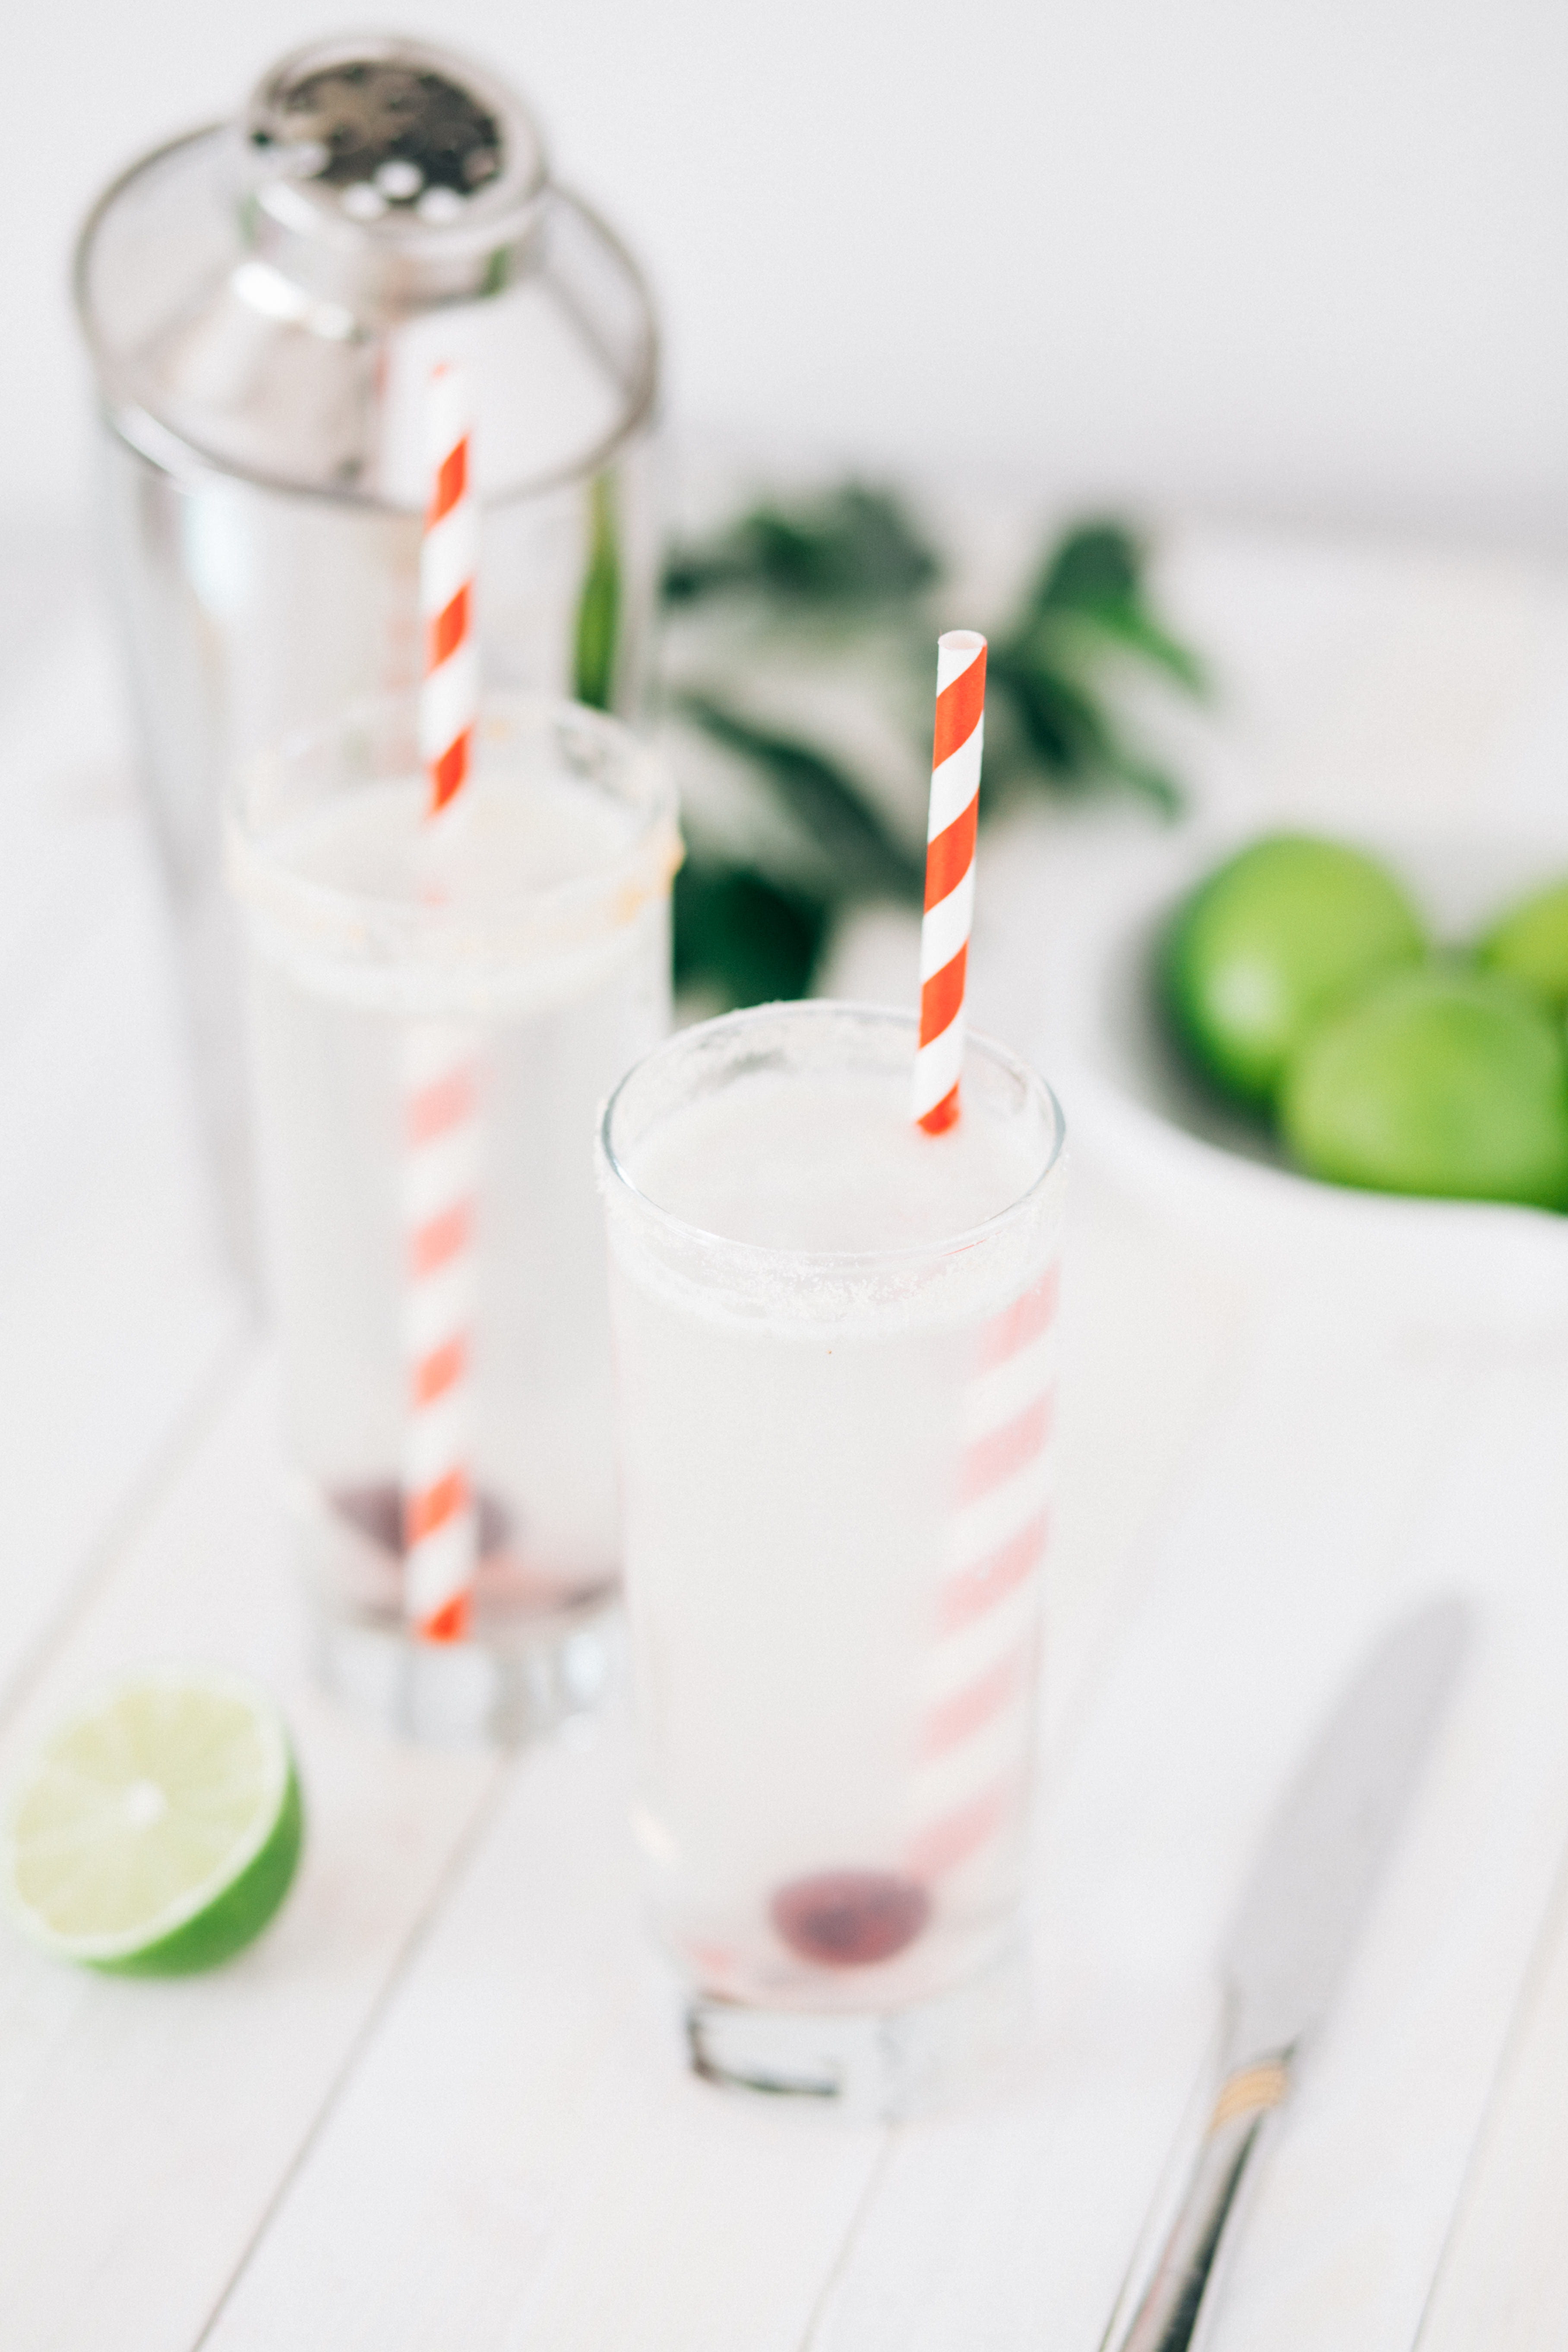 two round clear glass drinking cups near gray stainless steel knife, selective focus photography of drink with straw